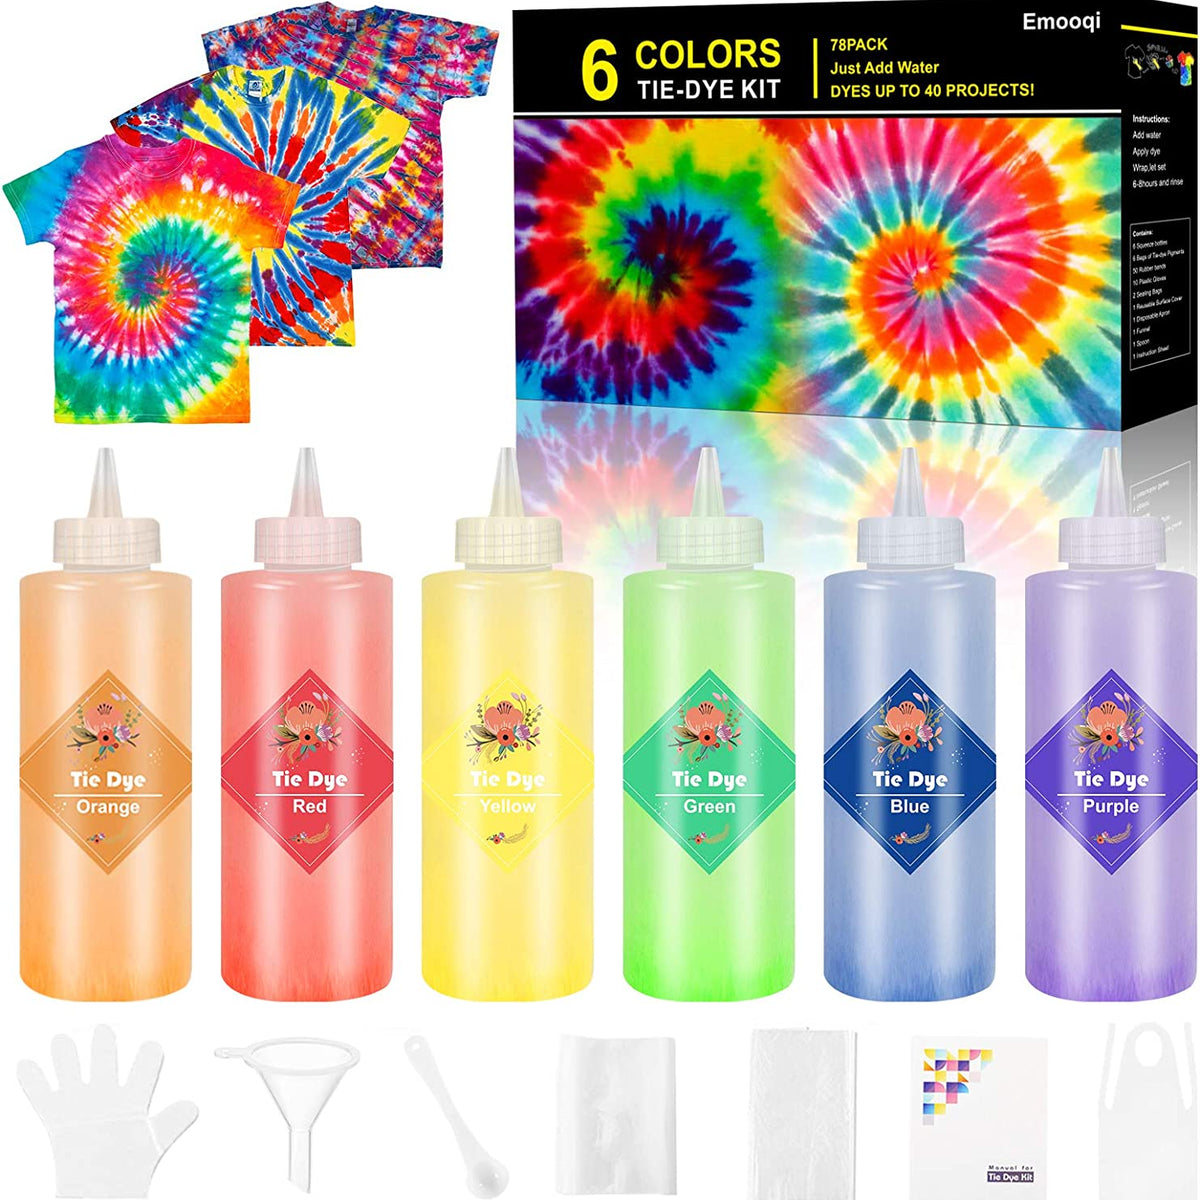 Adebena Tie Dye Kit, 18 Colors Tie Dye Kit for Kids and Adults, Non-Toxic  Fabric